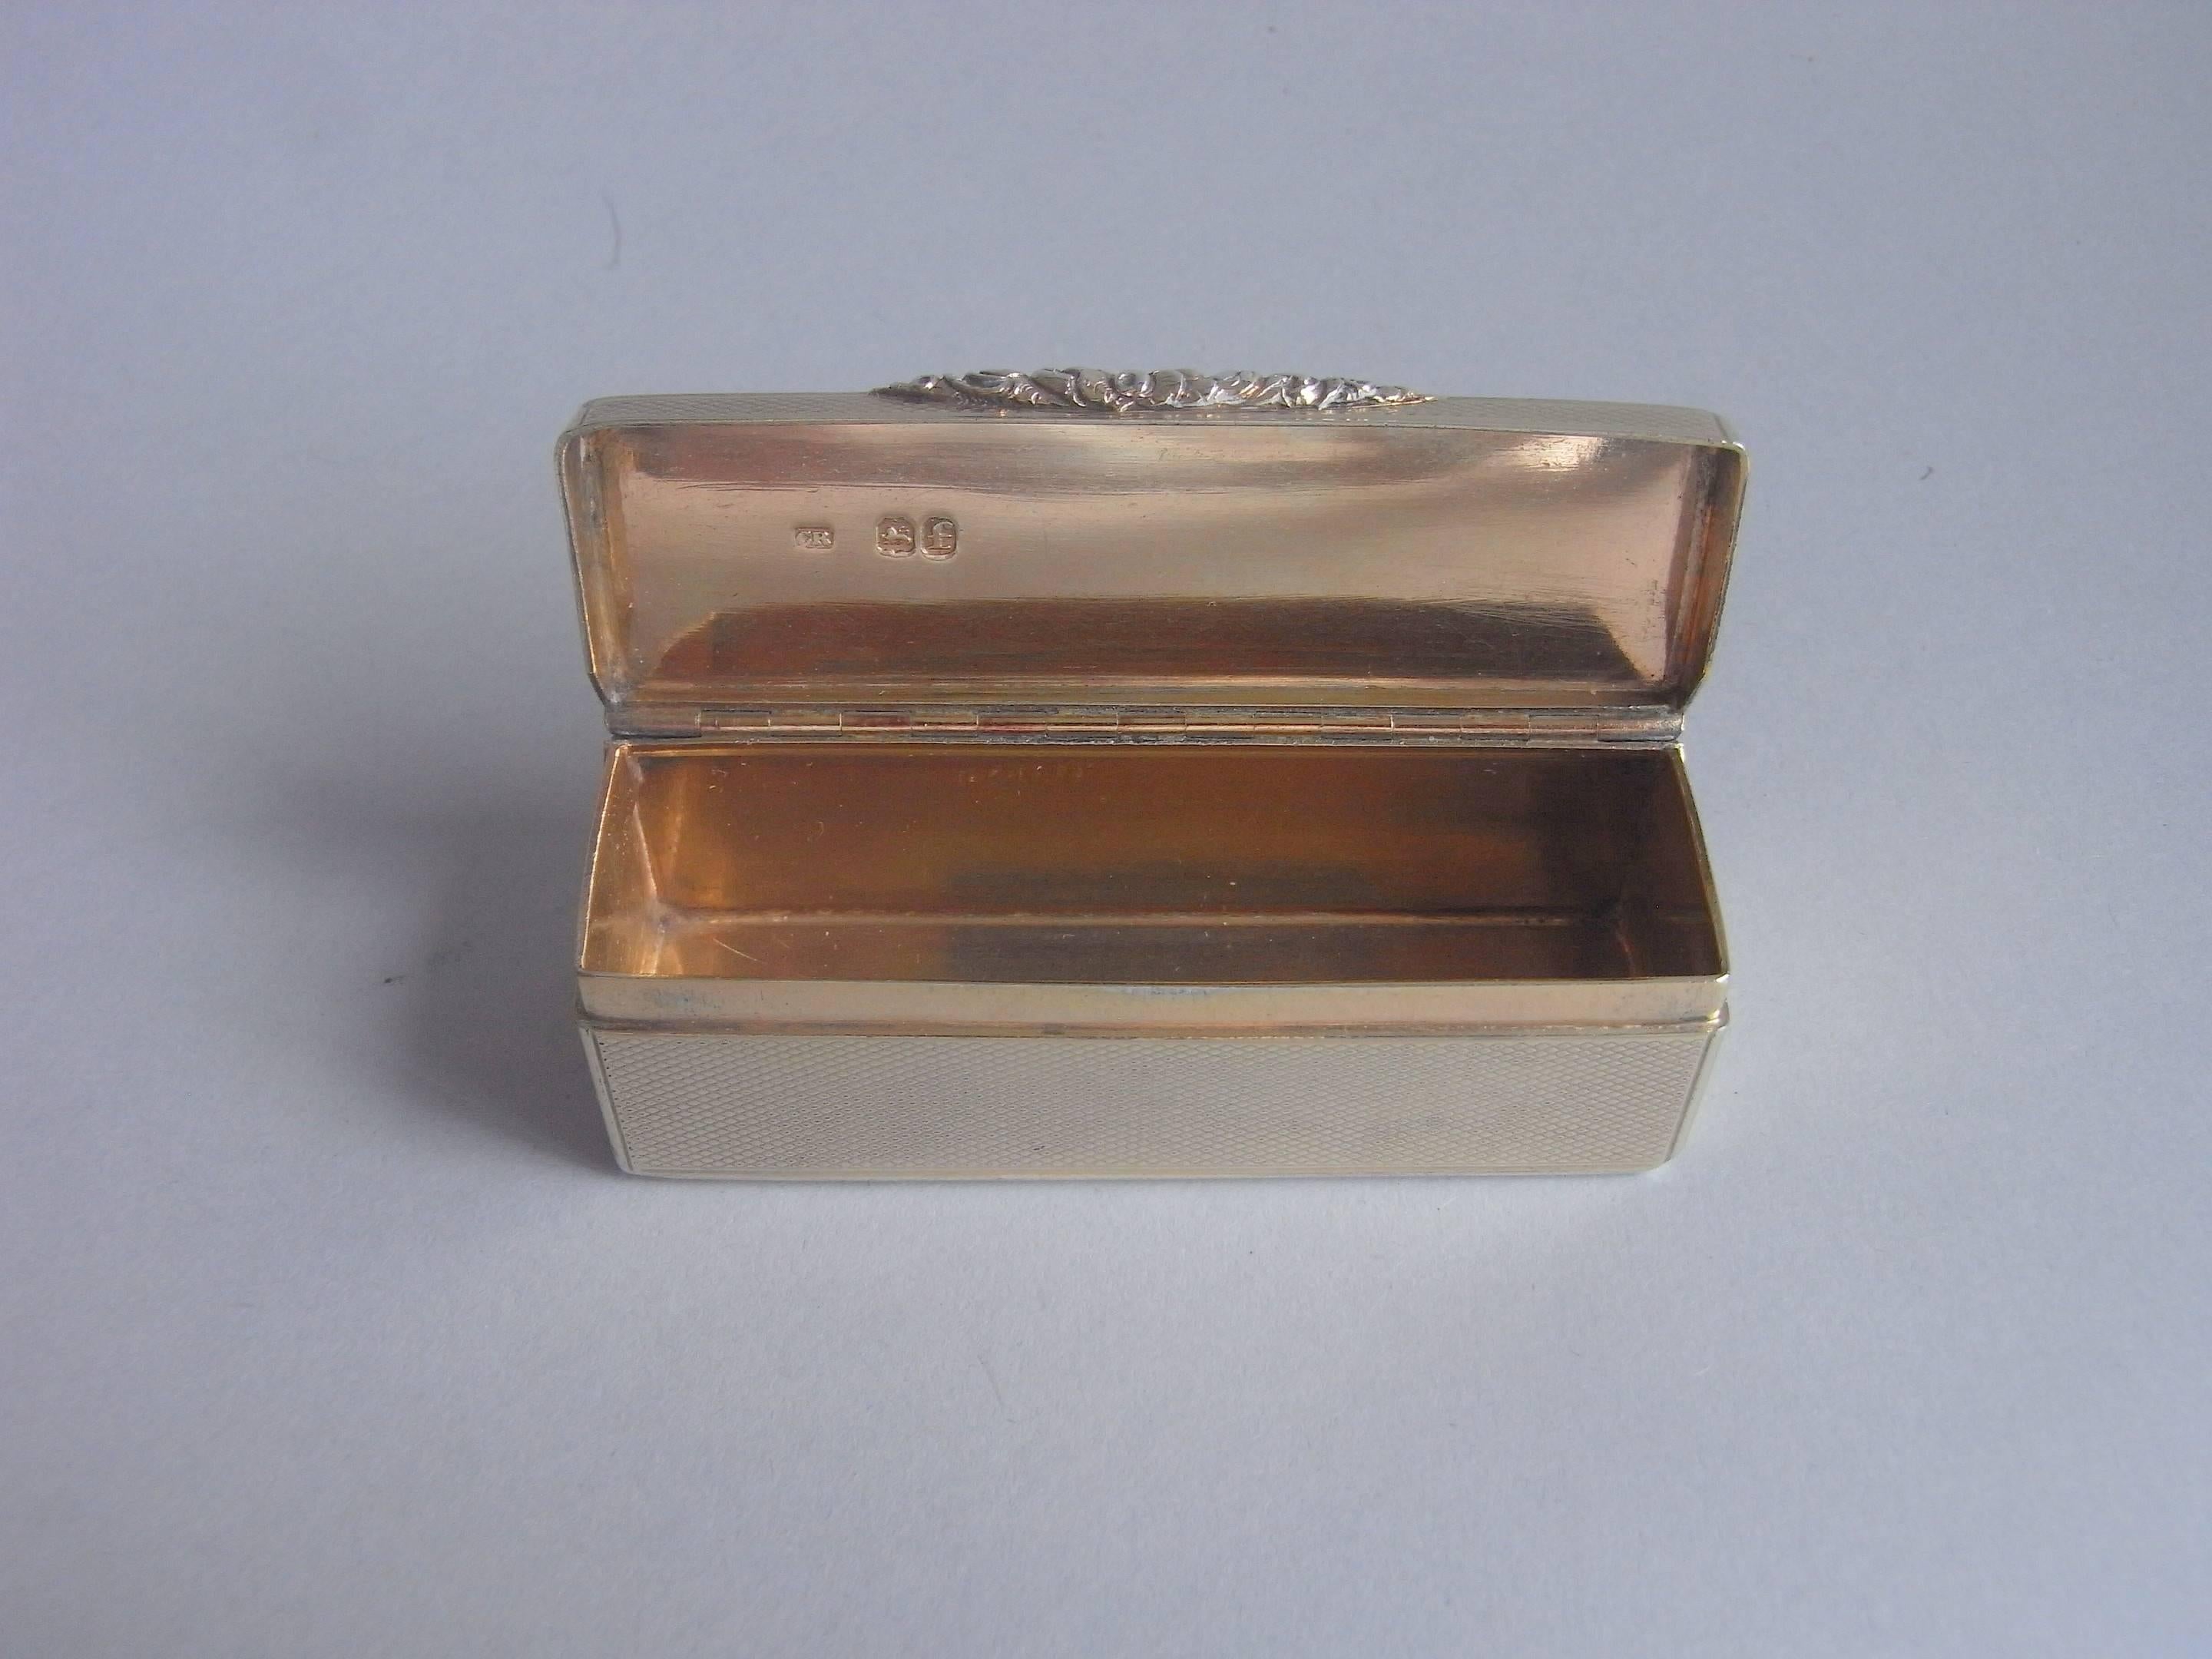 English Extremely Fine George IV Silver Gilt Snuff Box Made by Charles Rawlings